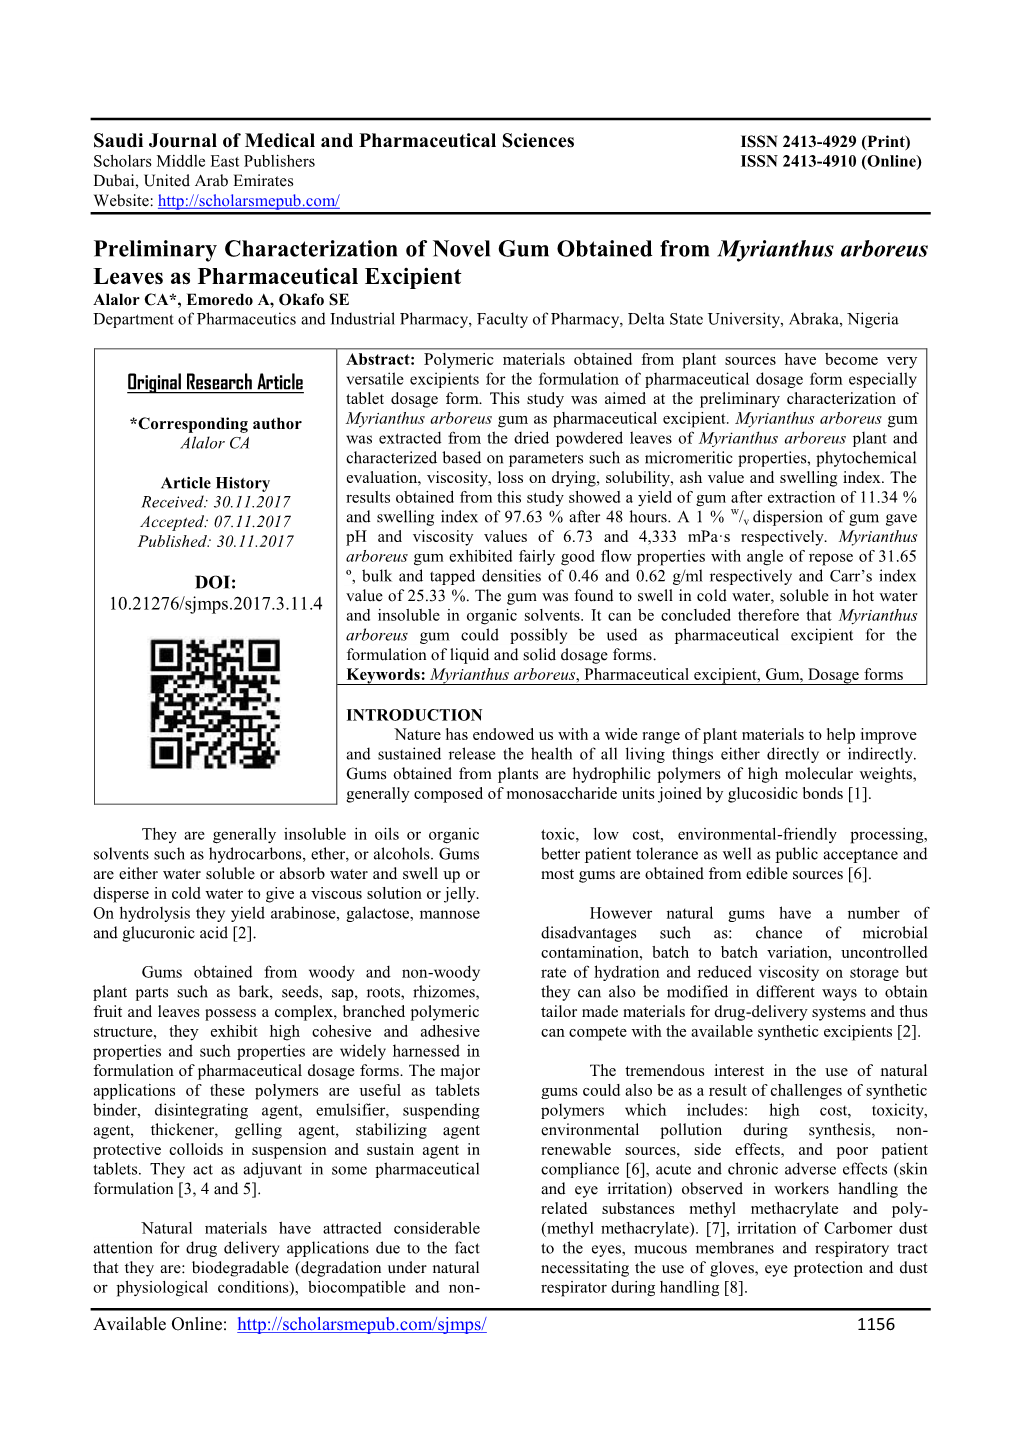 Preliminary Characterization of Novel Gum Obtained from Myrianthus